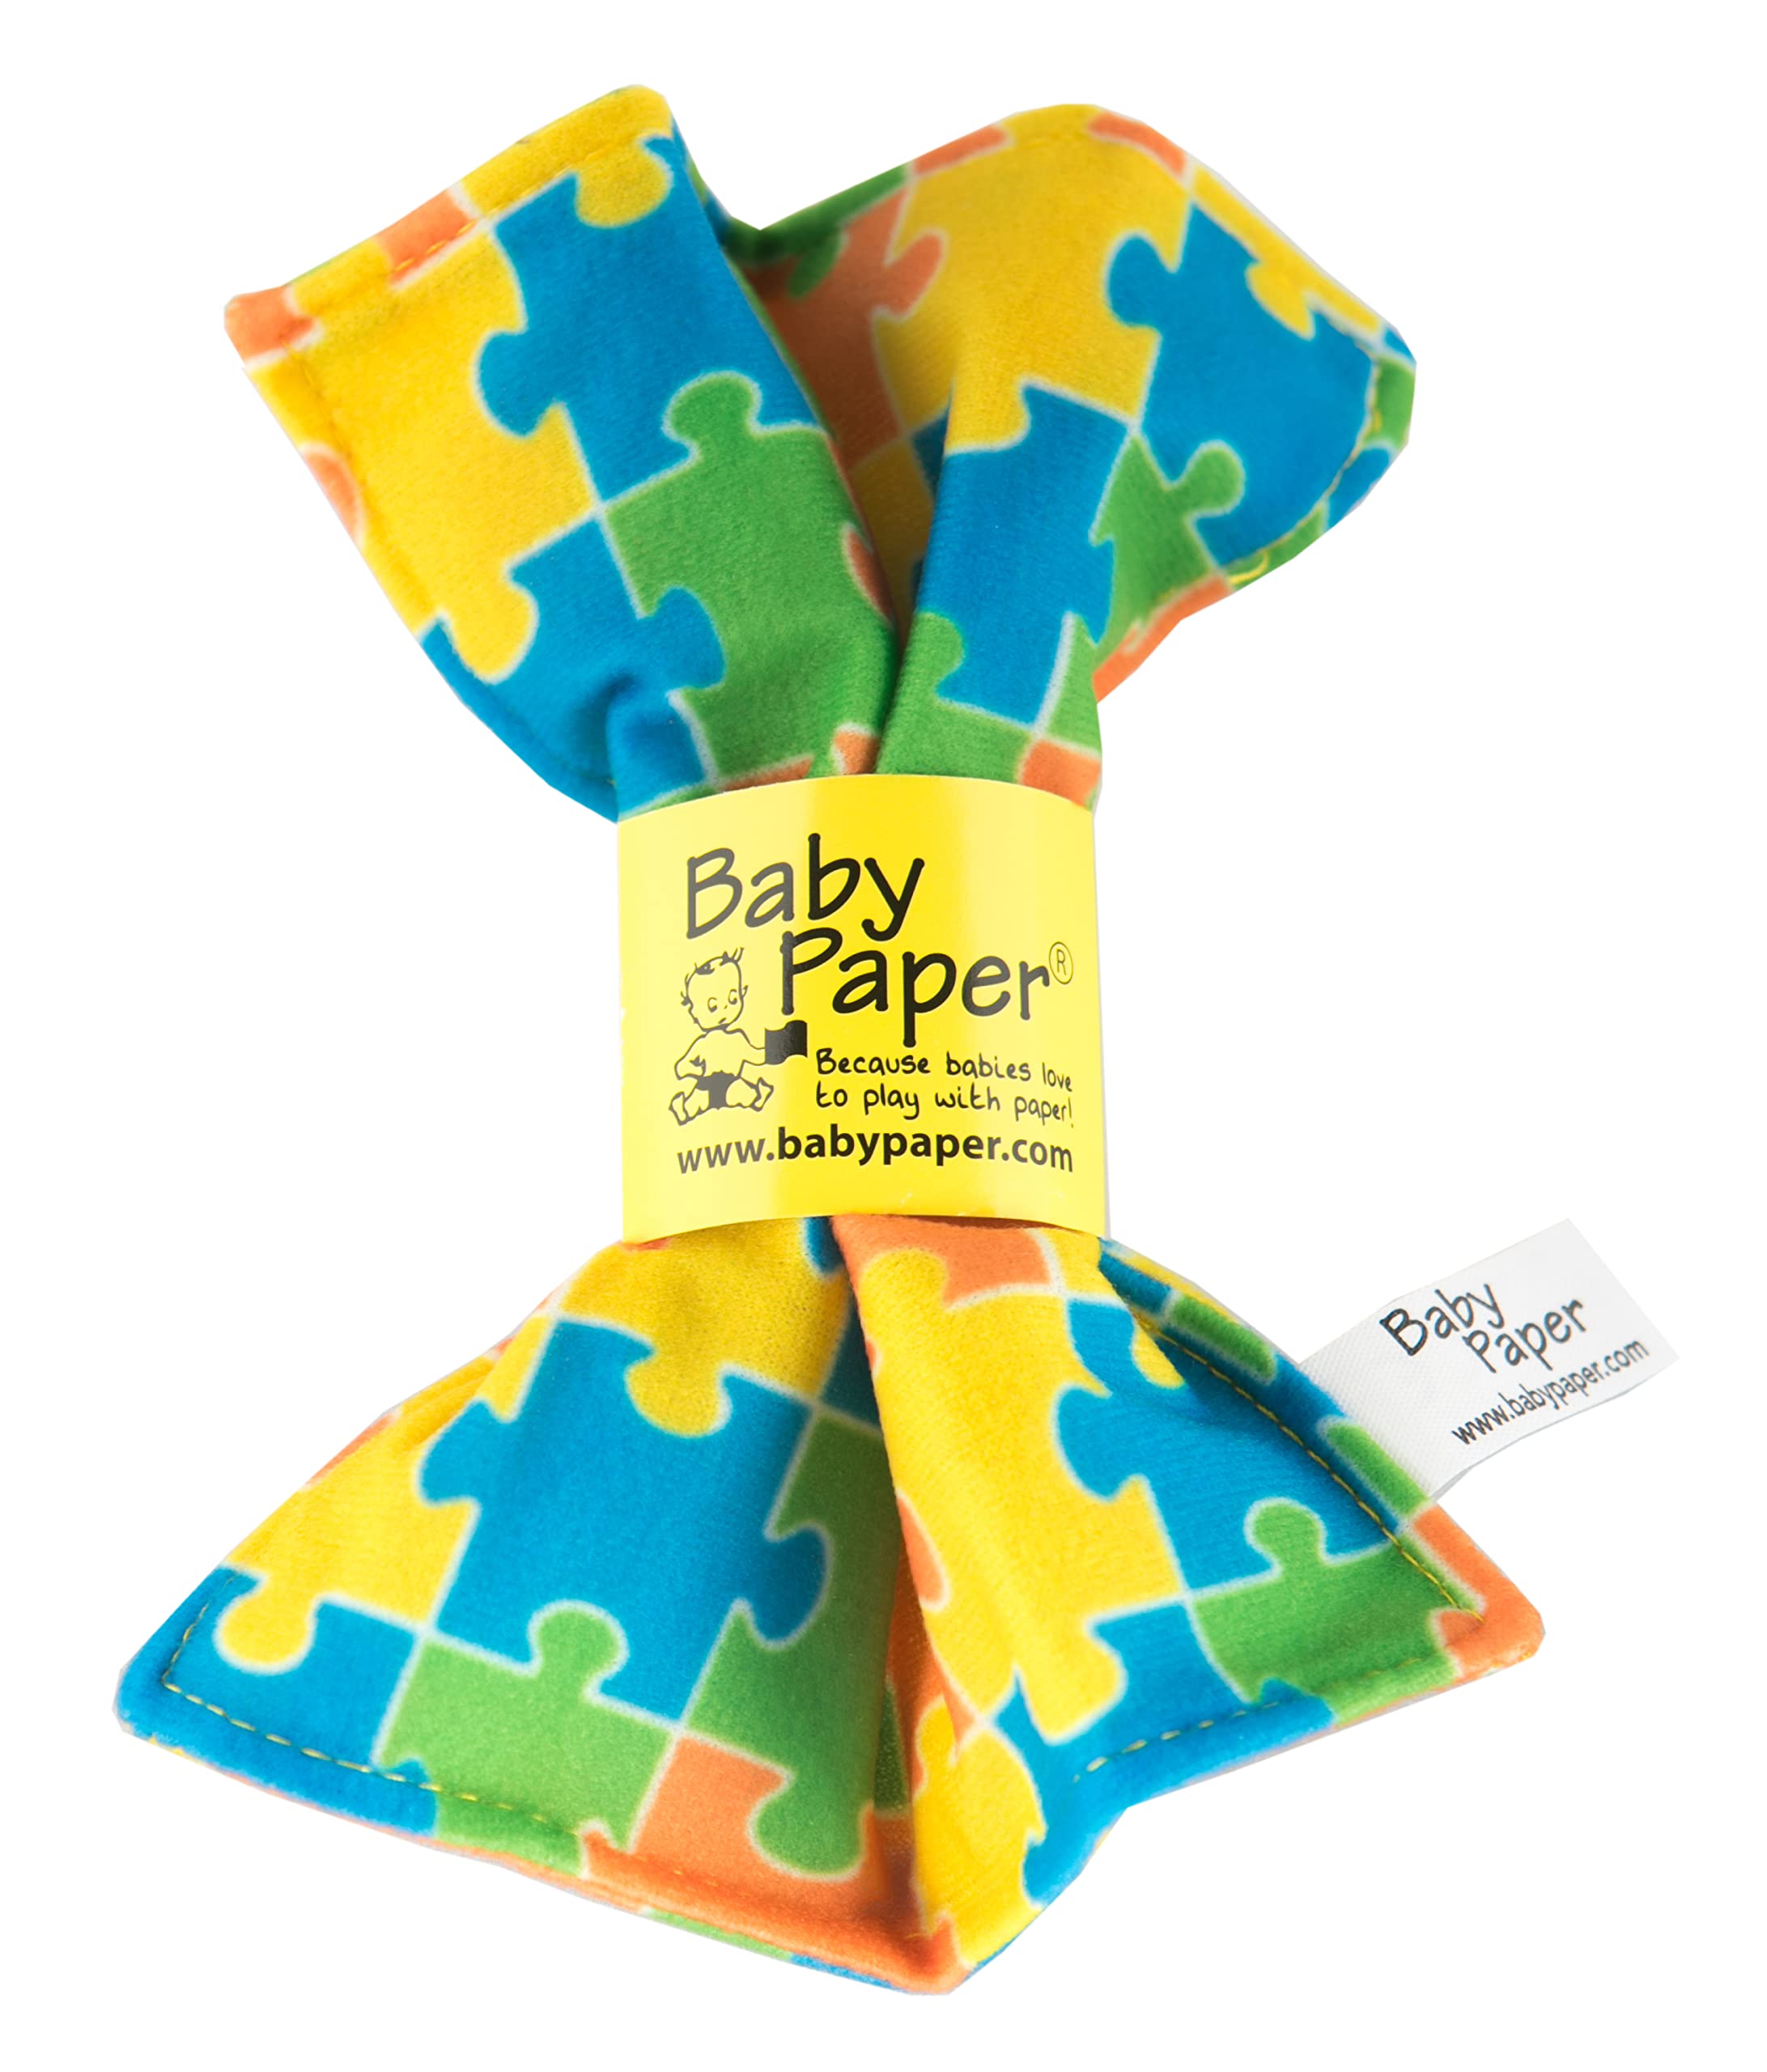 Original Baby Paper - Crinkle Paper and Sensory Toy for Babies and Infants | Puzzle Printed | Non-Toxic, Washable